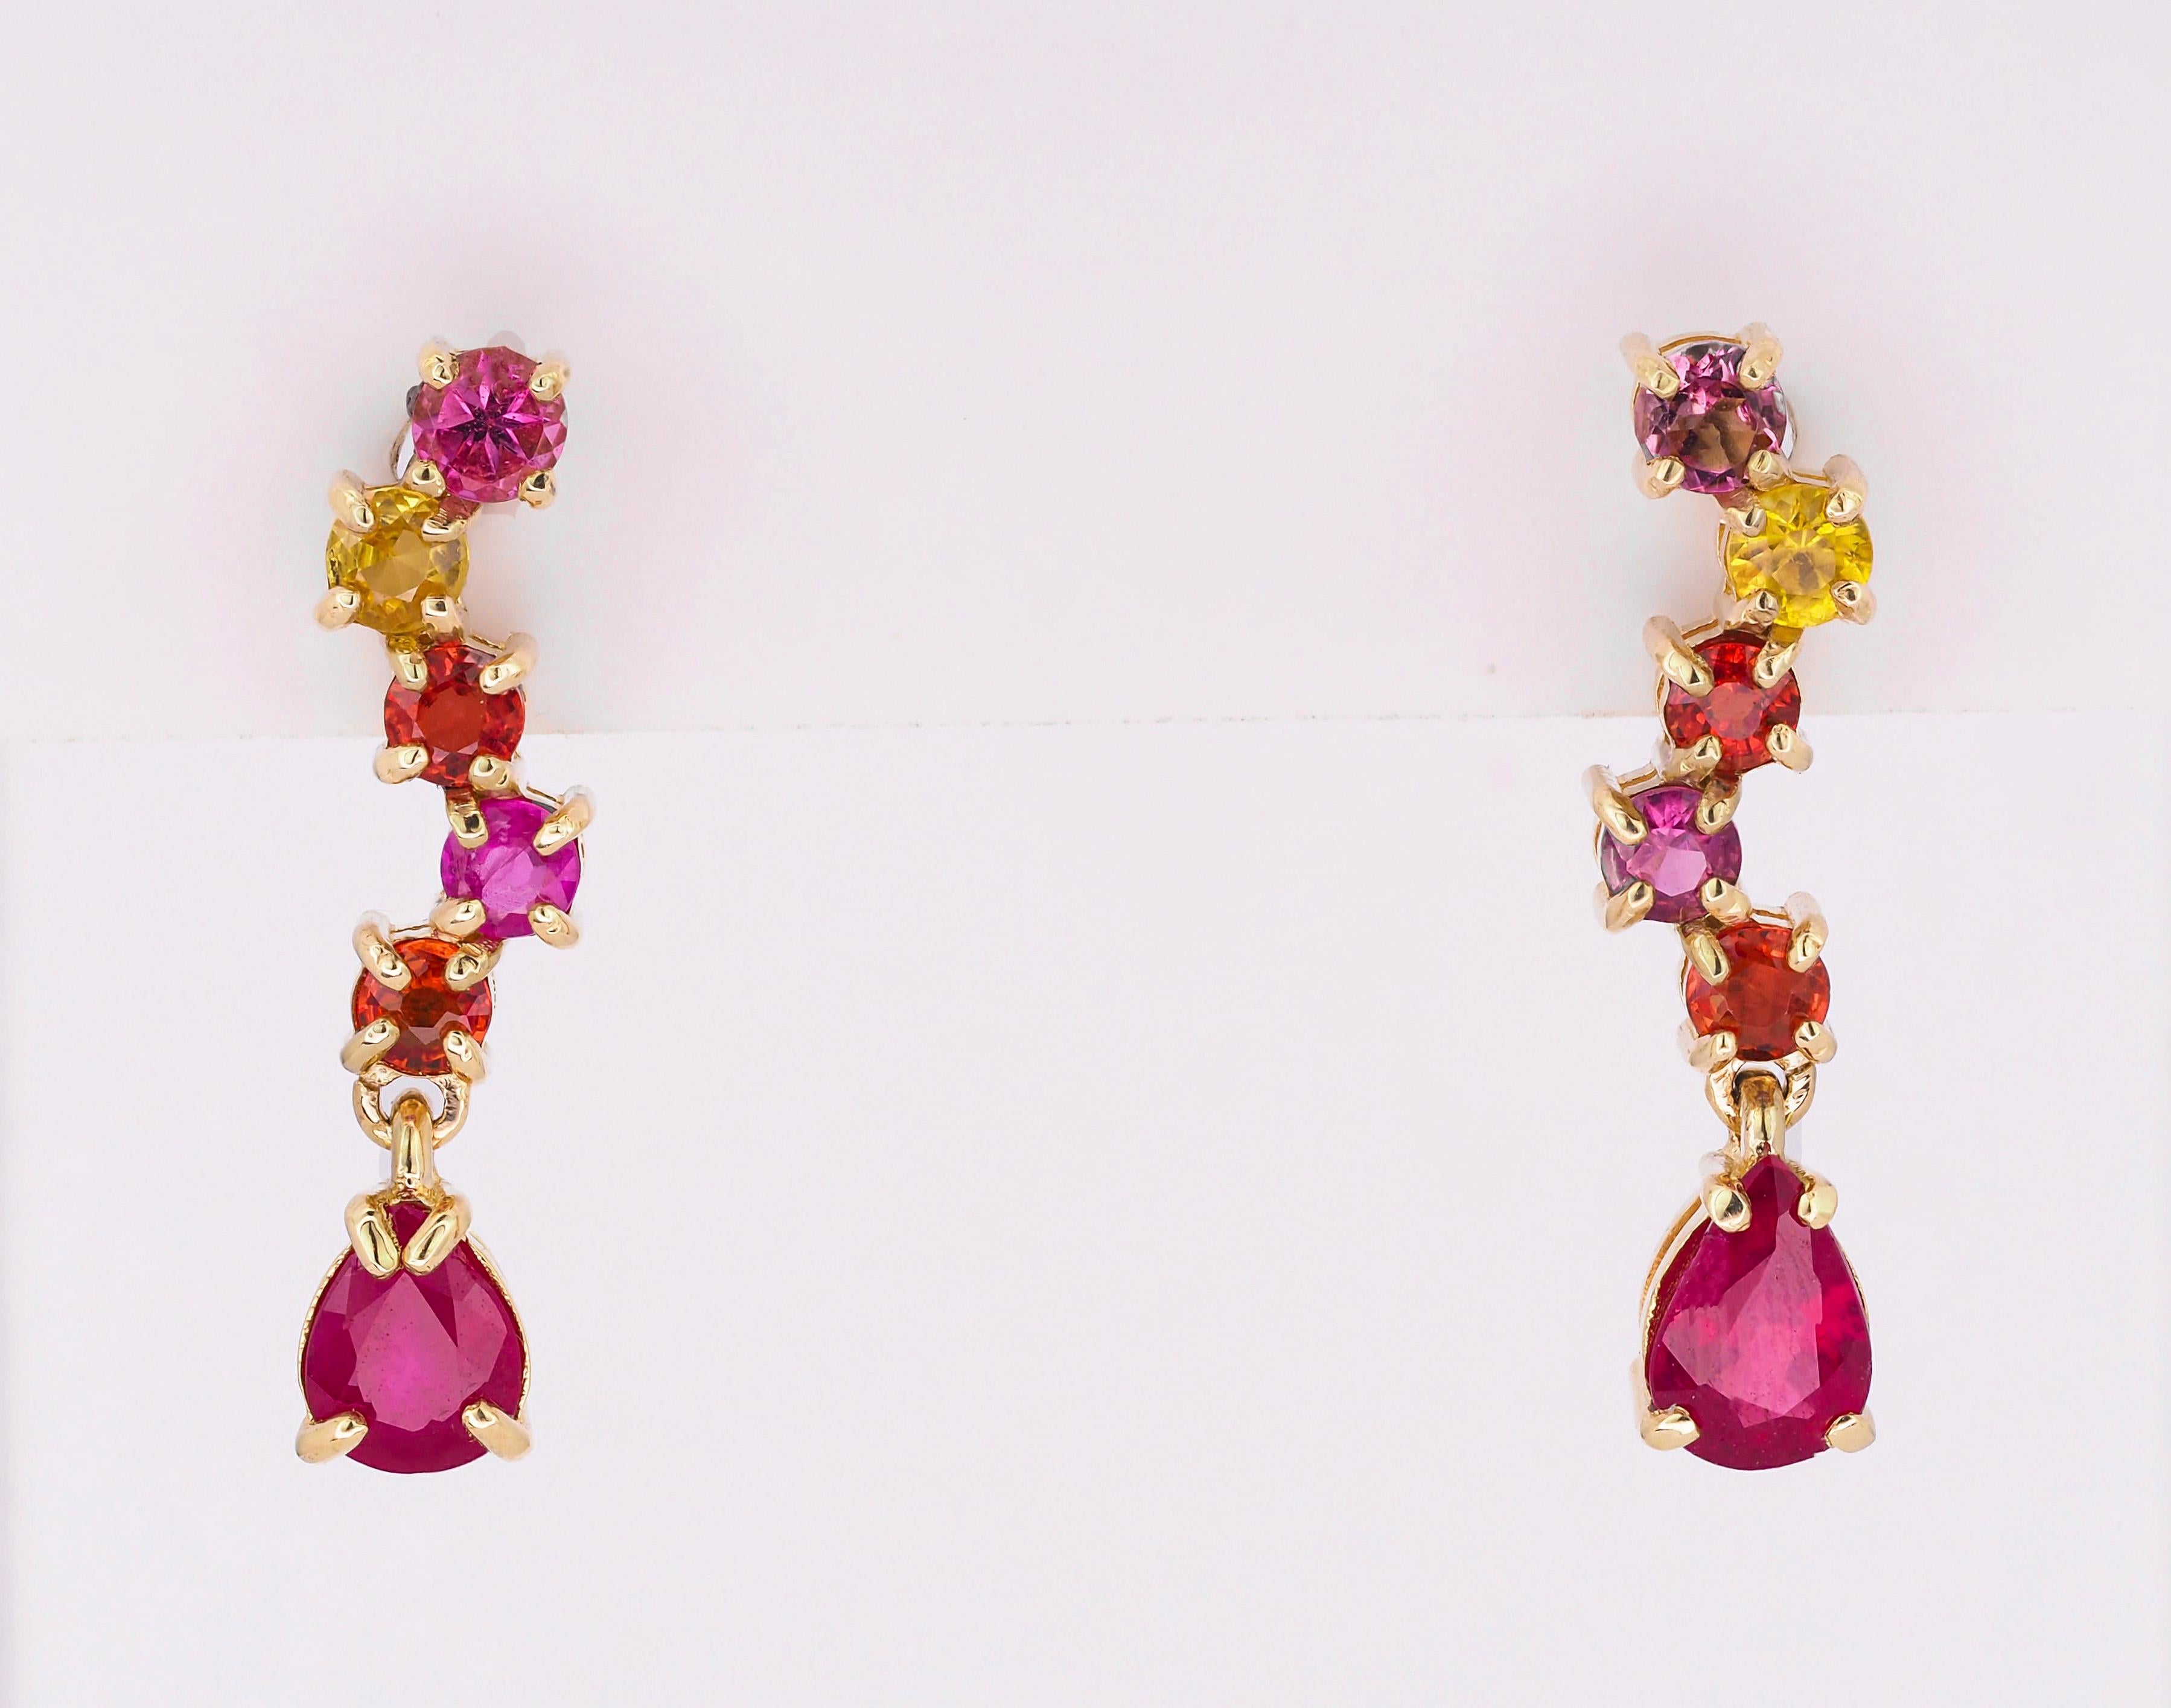 Modern 14k Gold Earrings Studs with Multicolor Sapphires and Rubies